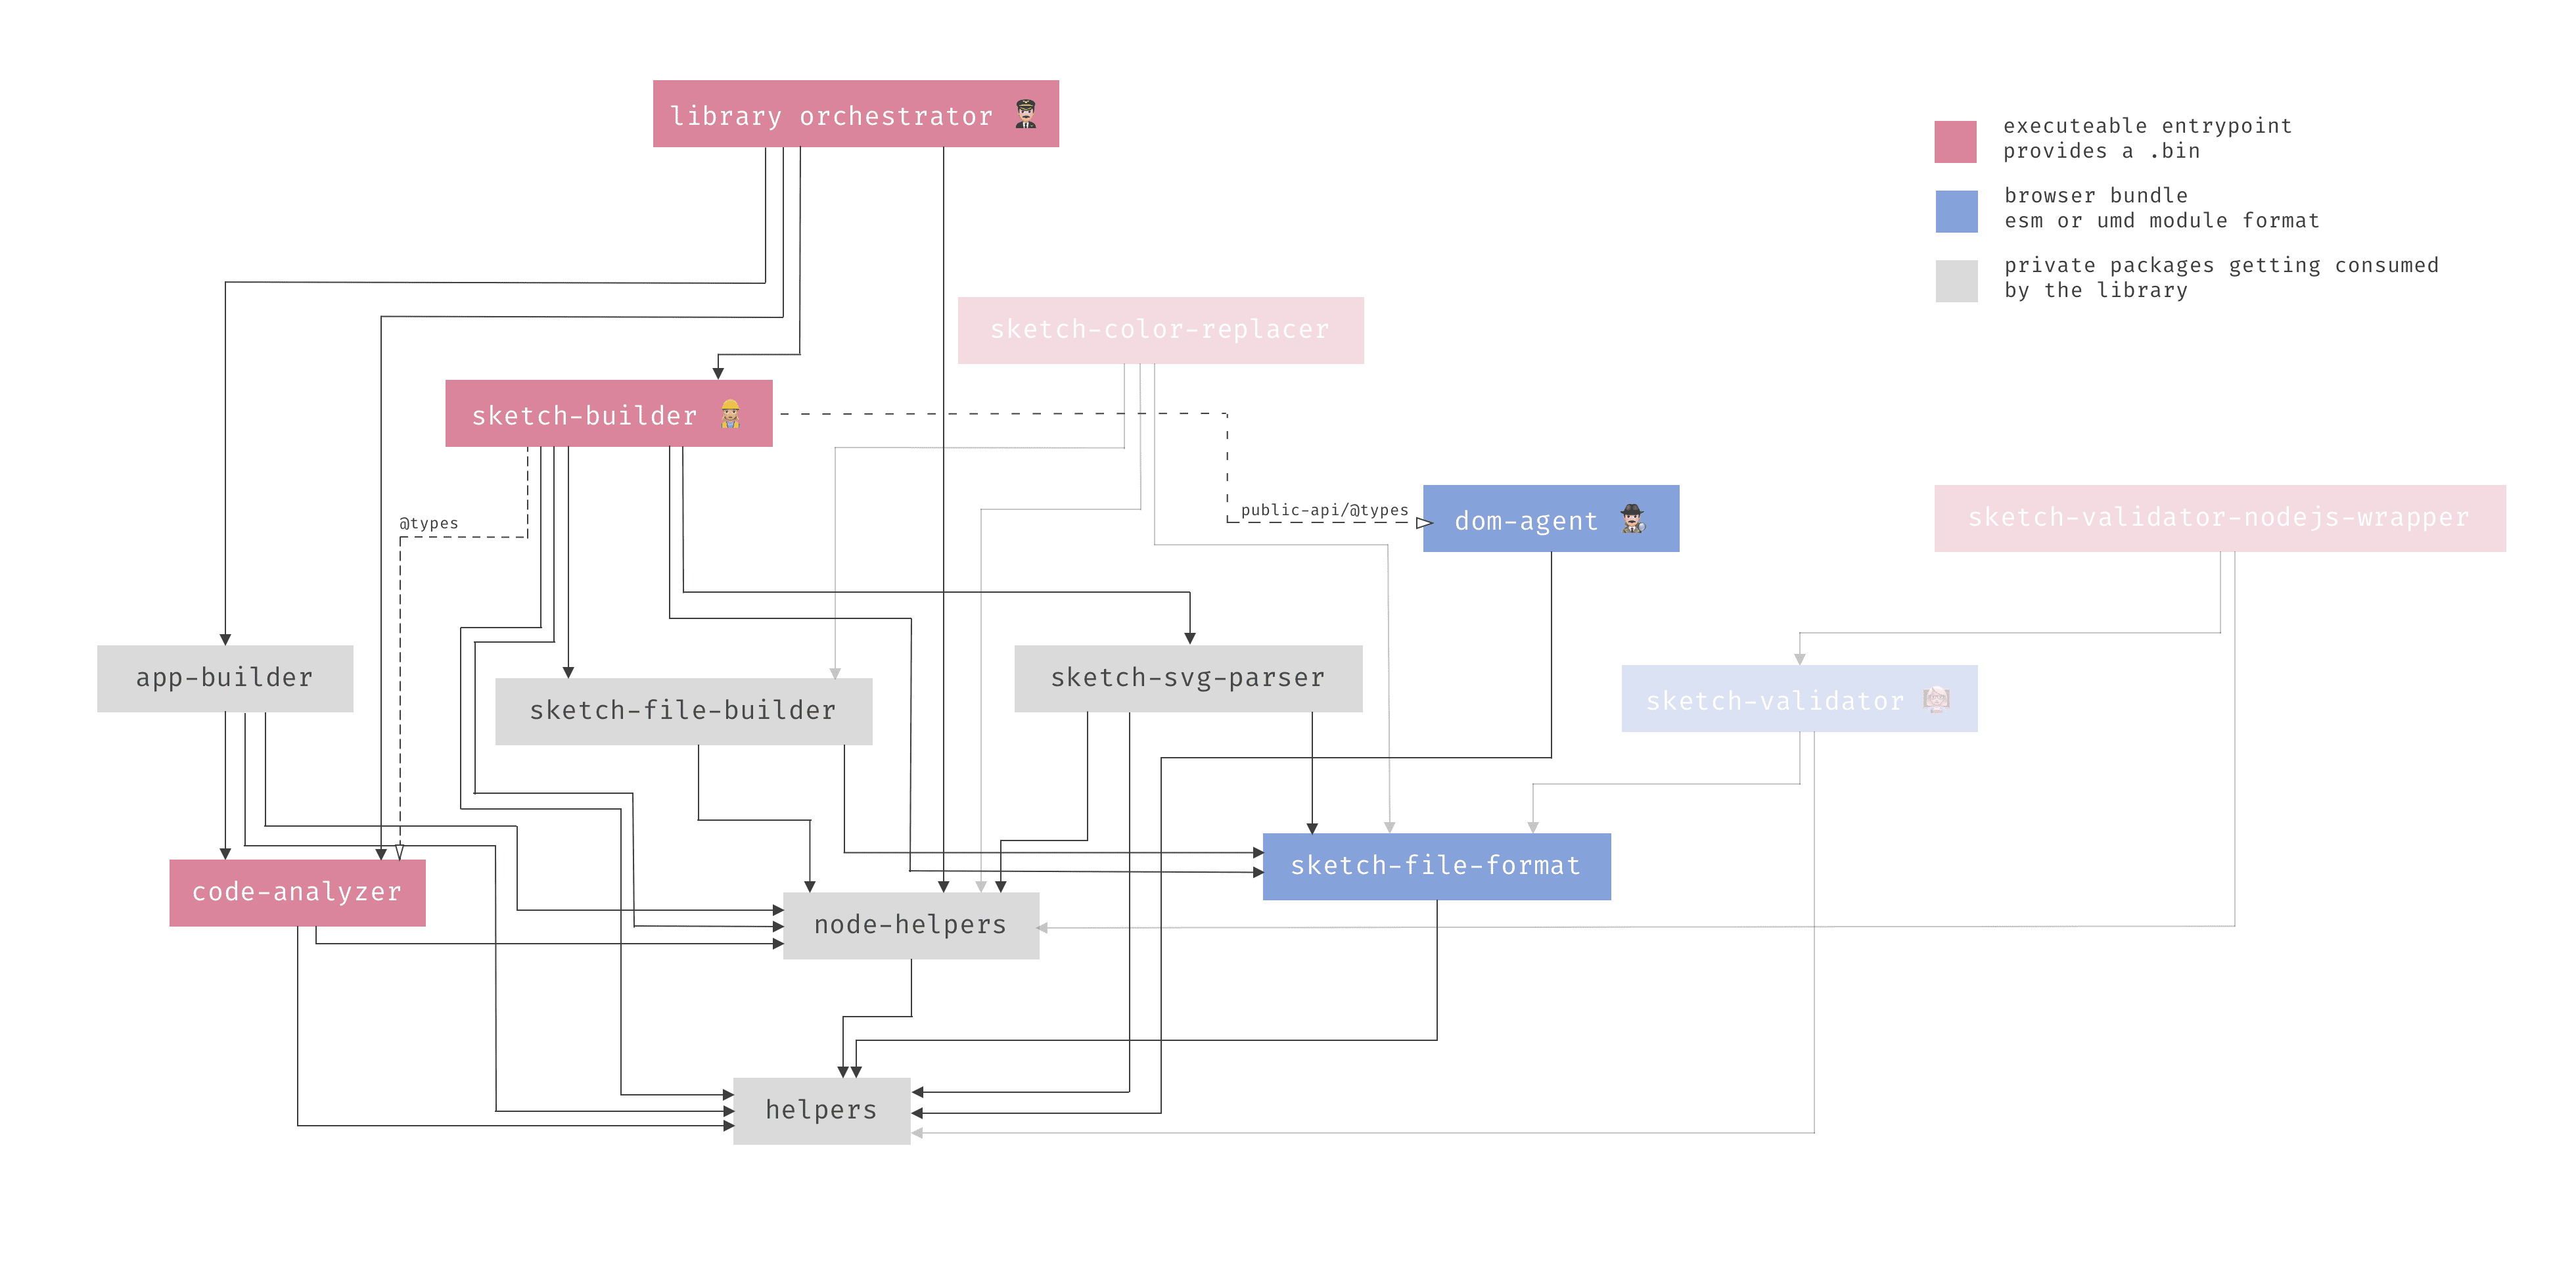 Dependency graph of the sketchmine library generation